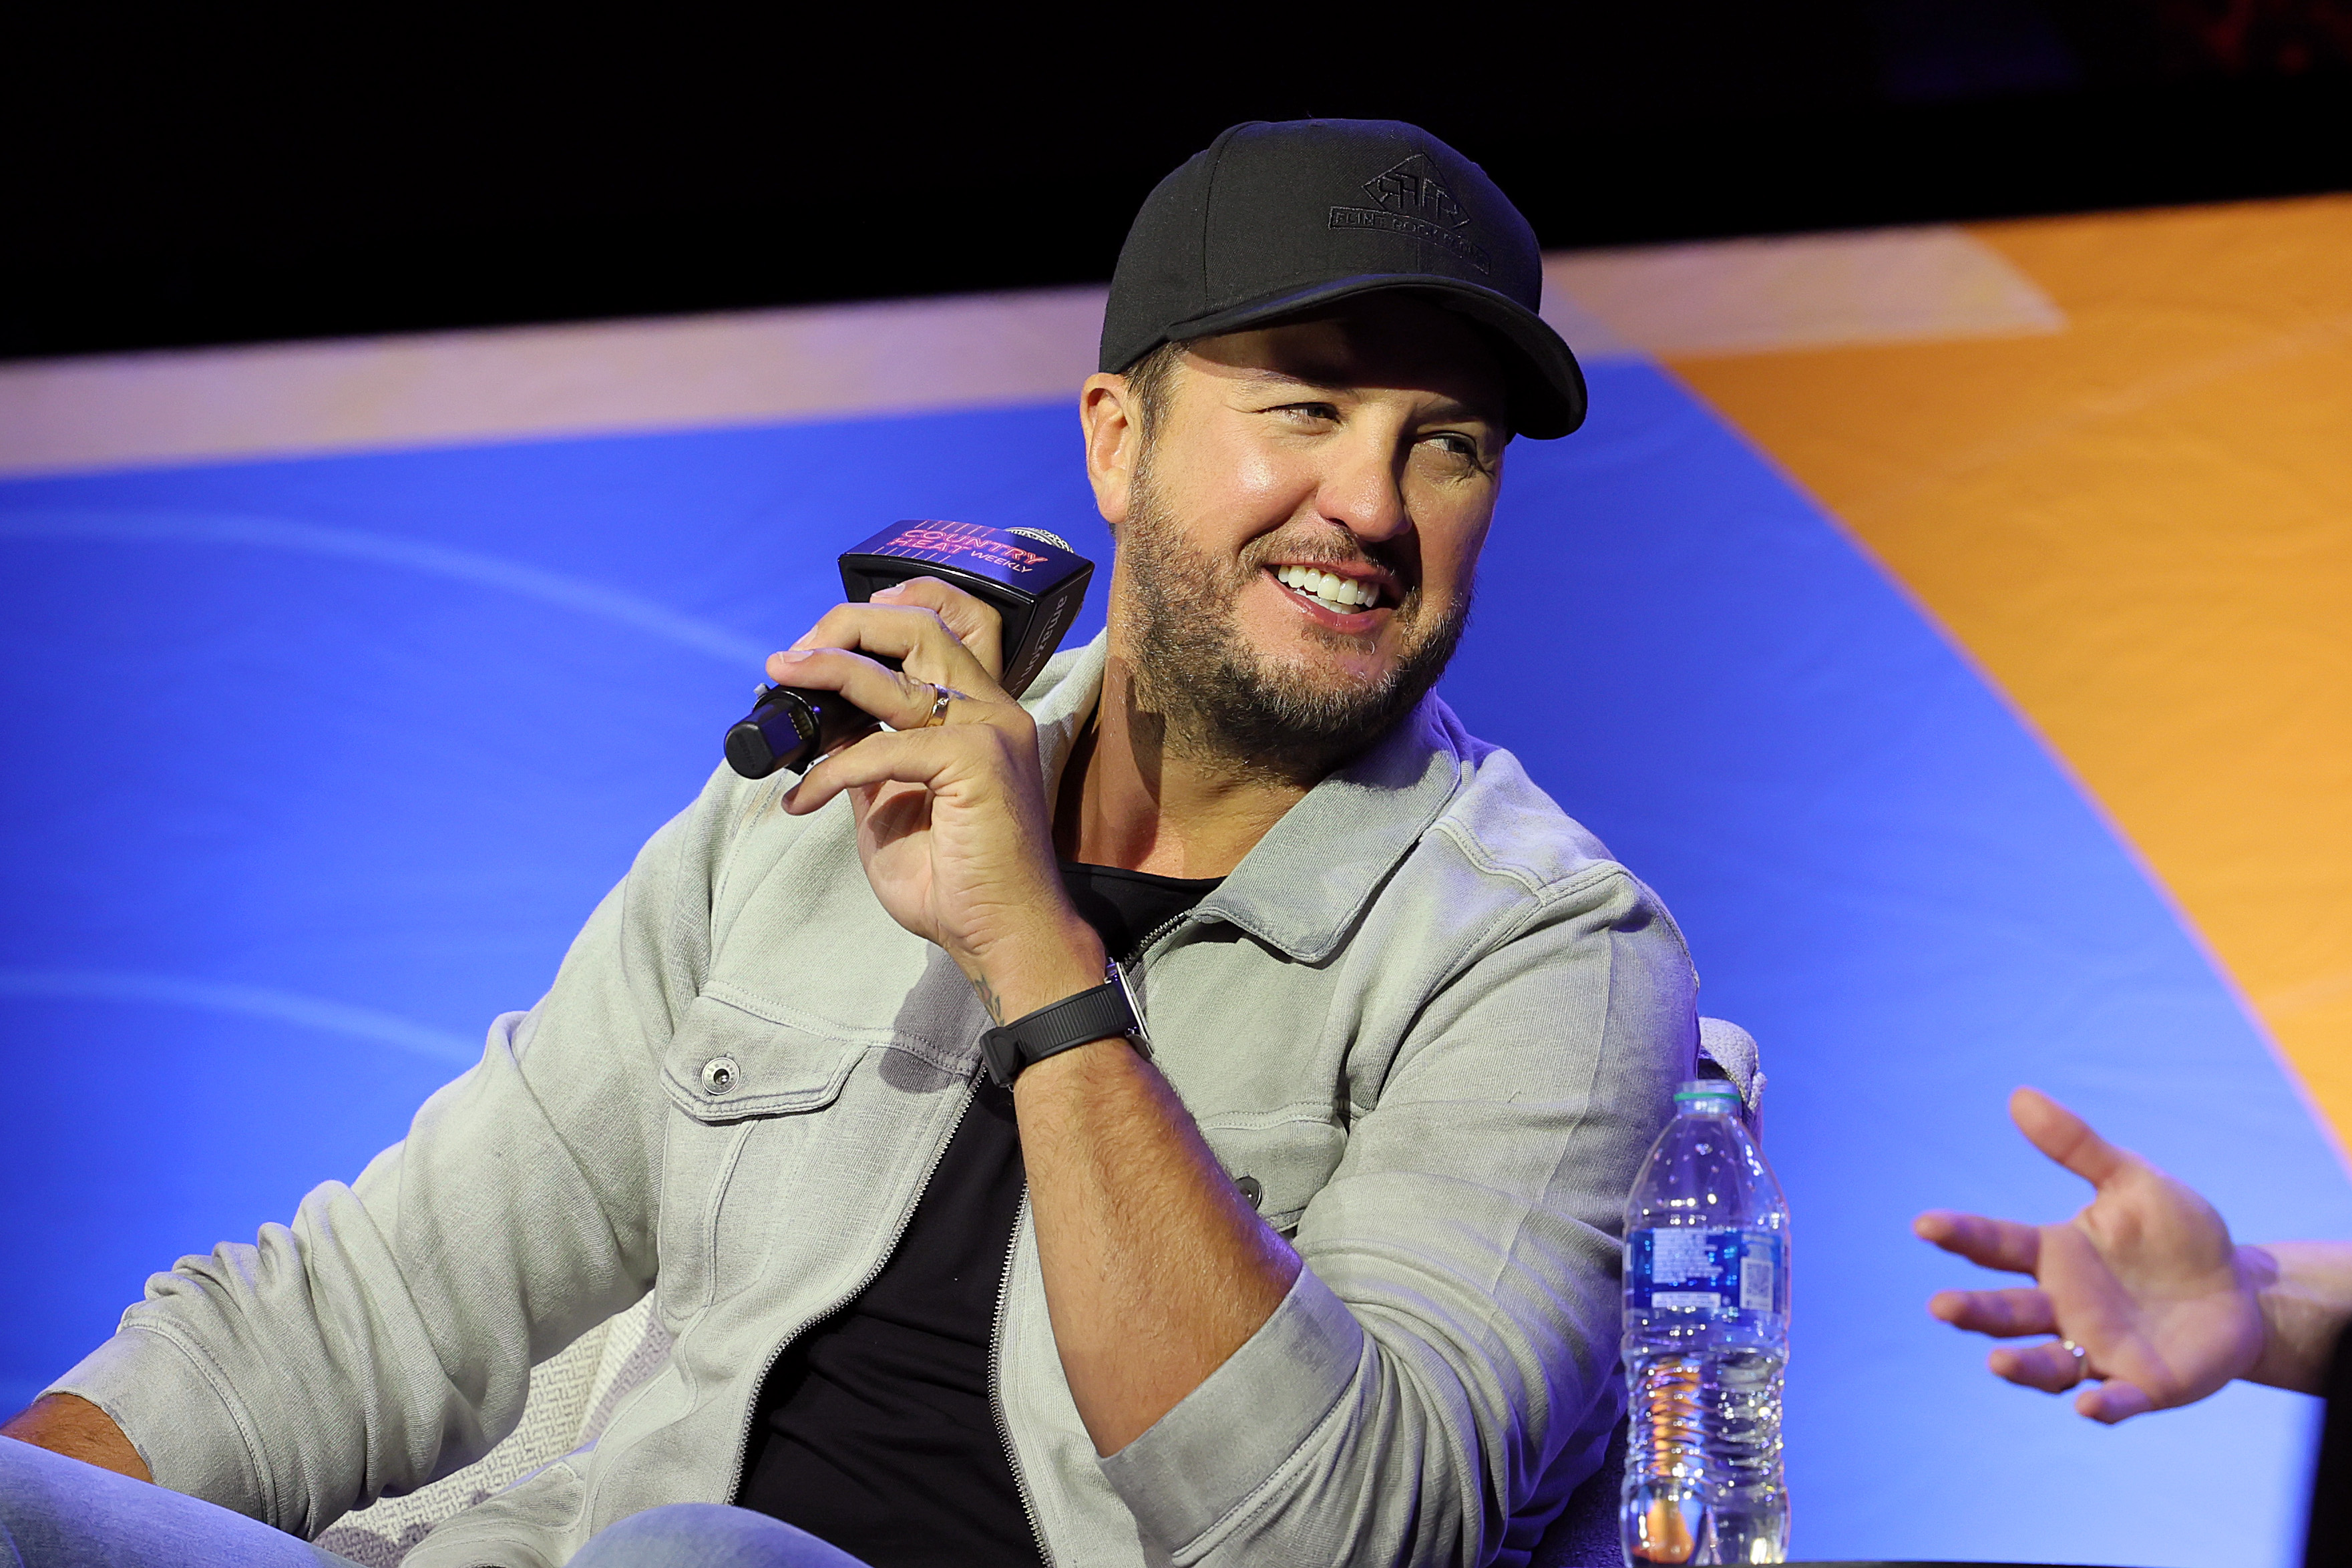 Luke Bryan Responds To Twitter Outrage After Bringing Ron Desantis On Stage